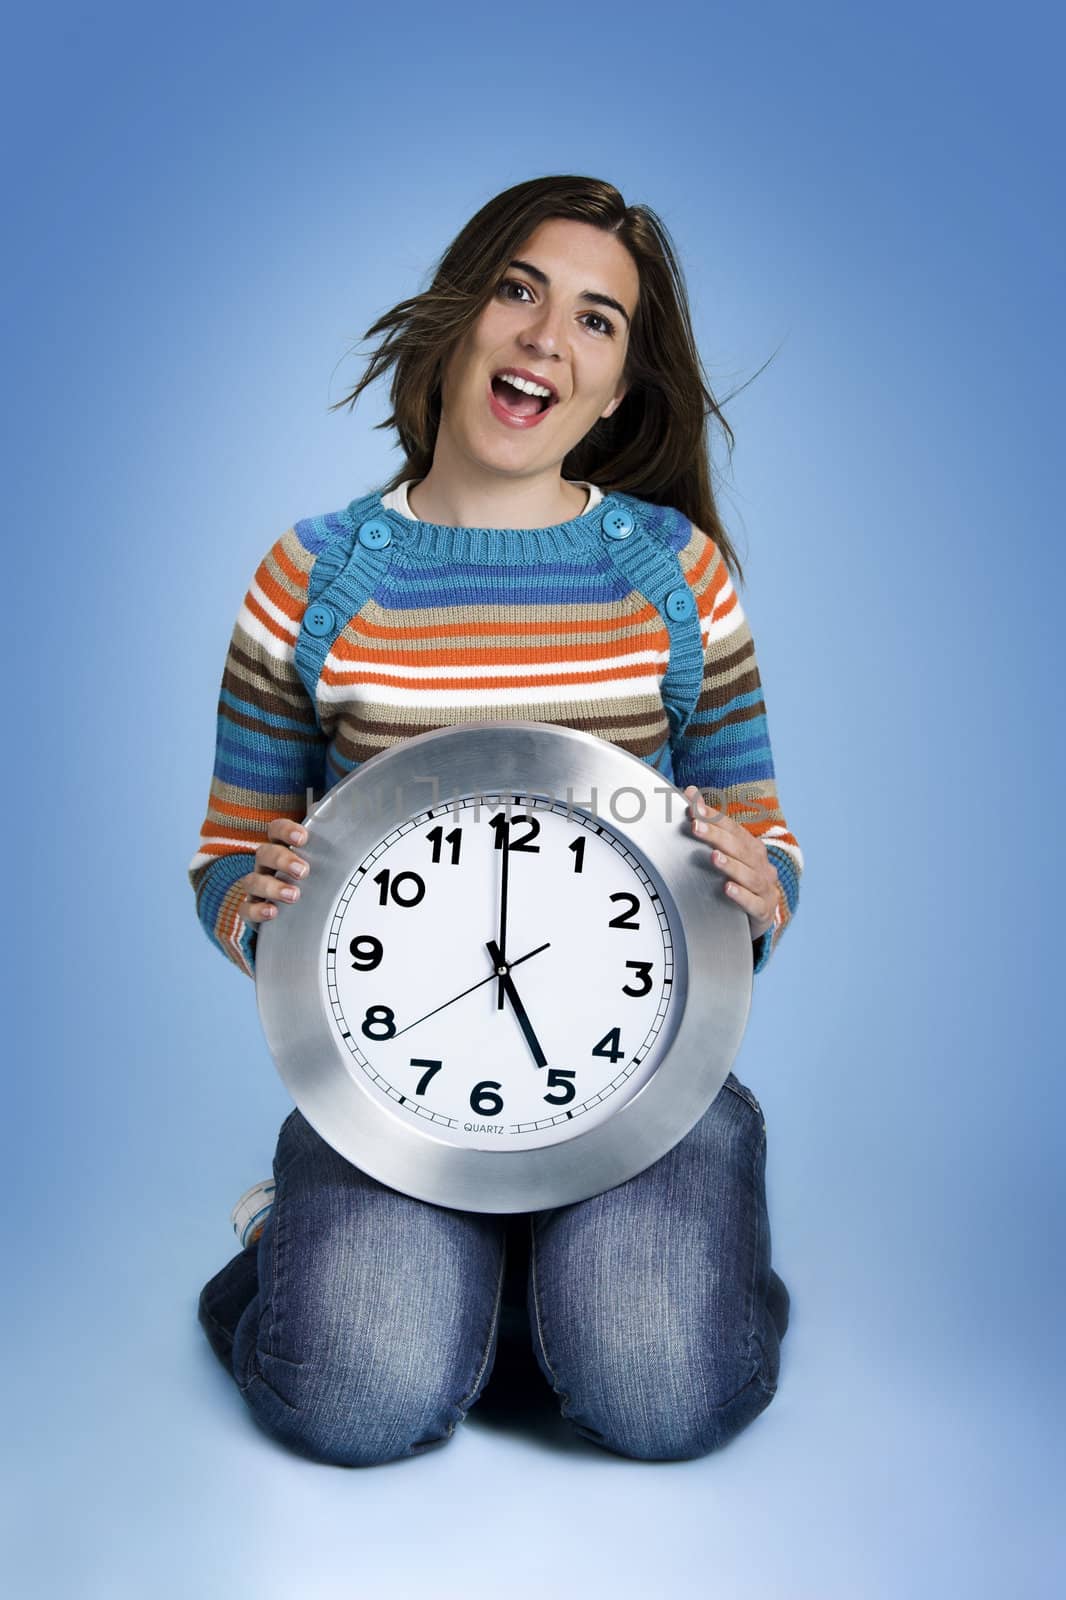 Beautiful women over knees holding a big clock in a blue background